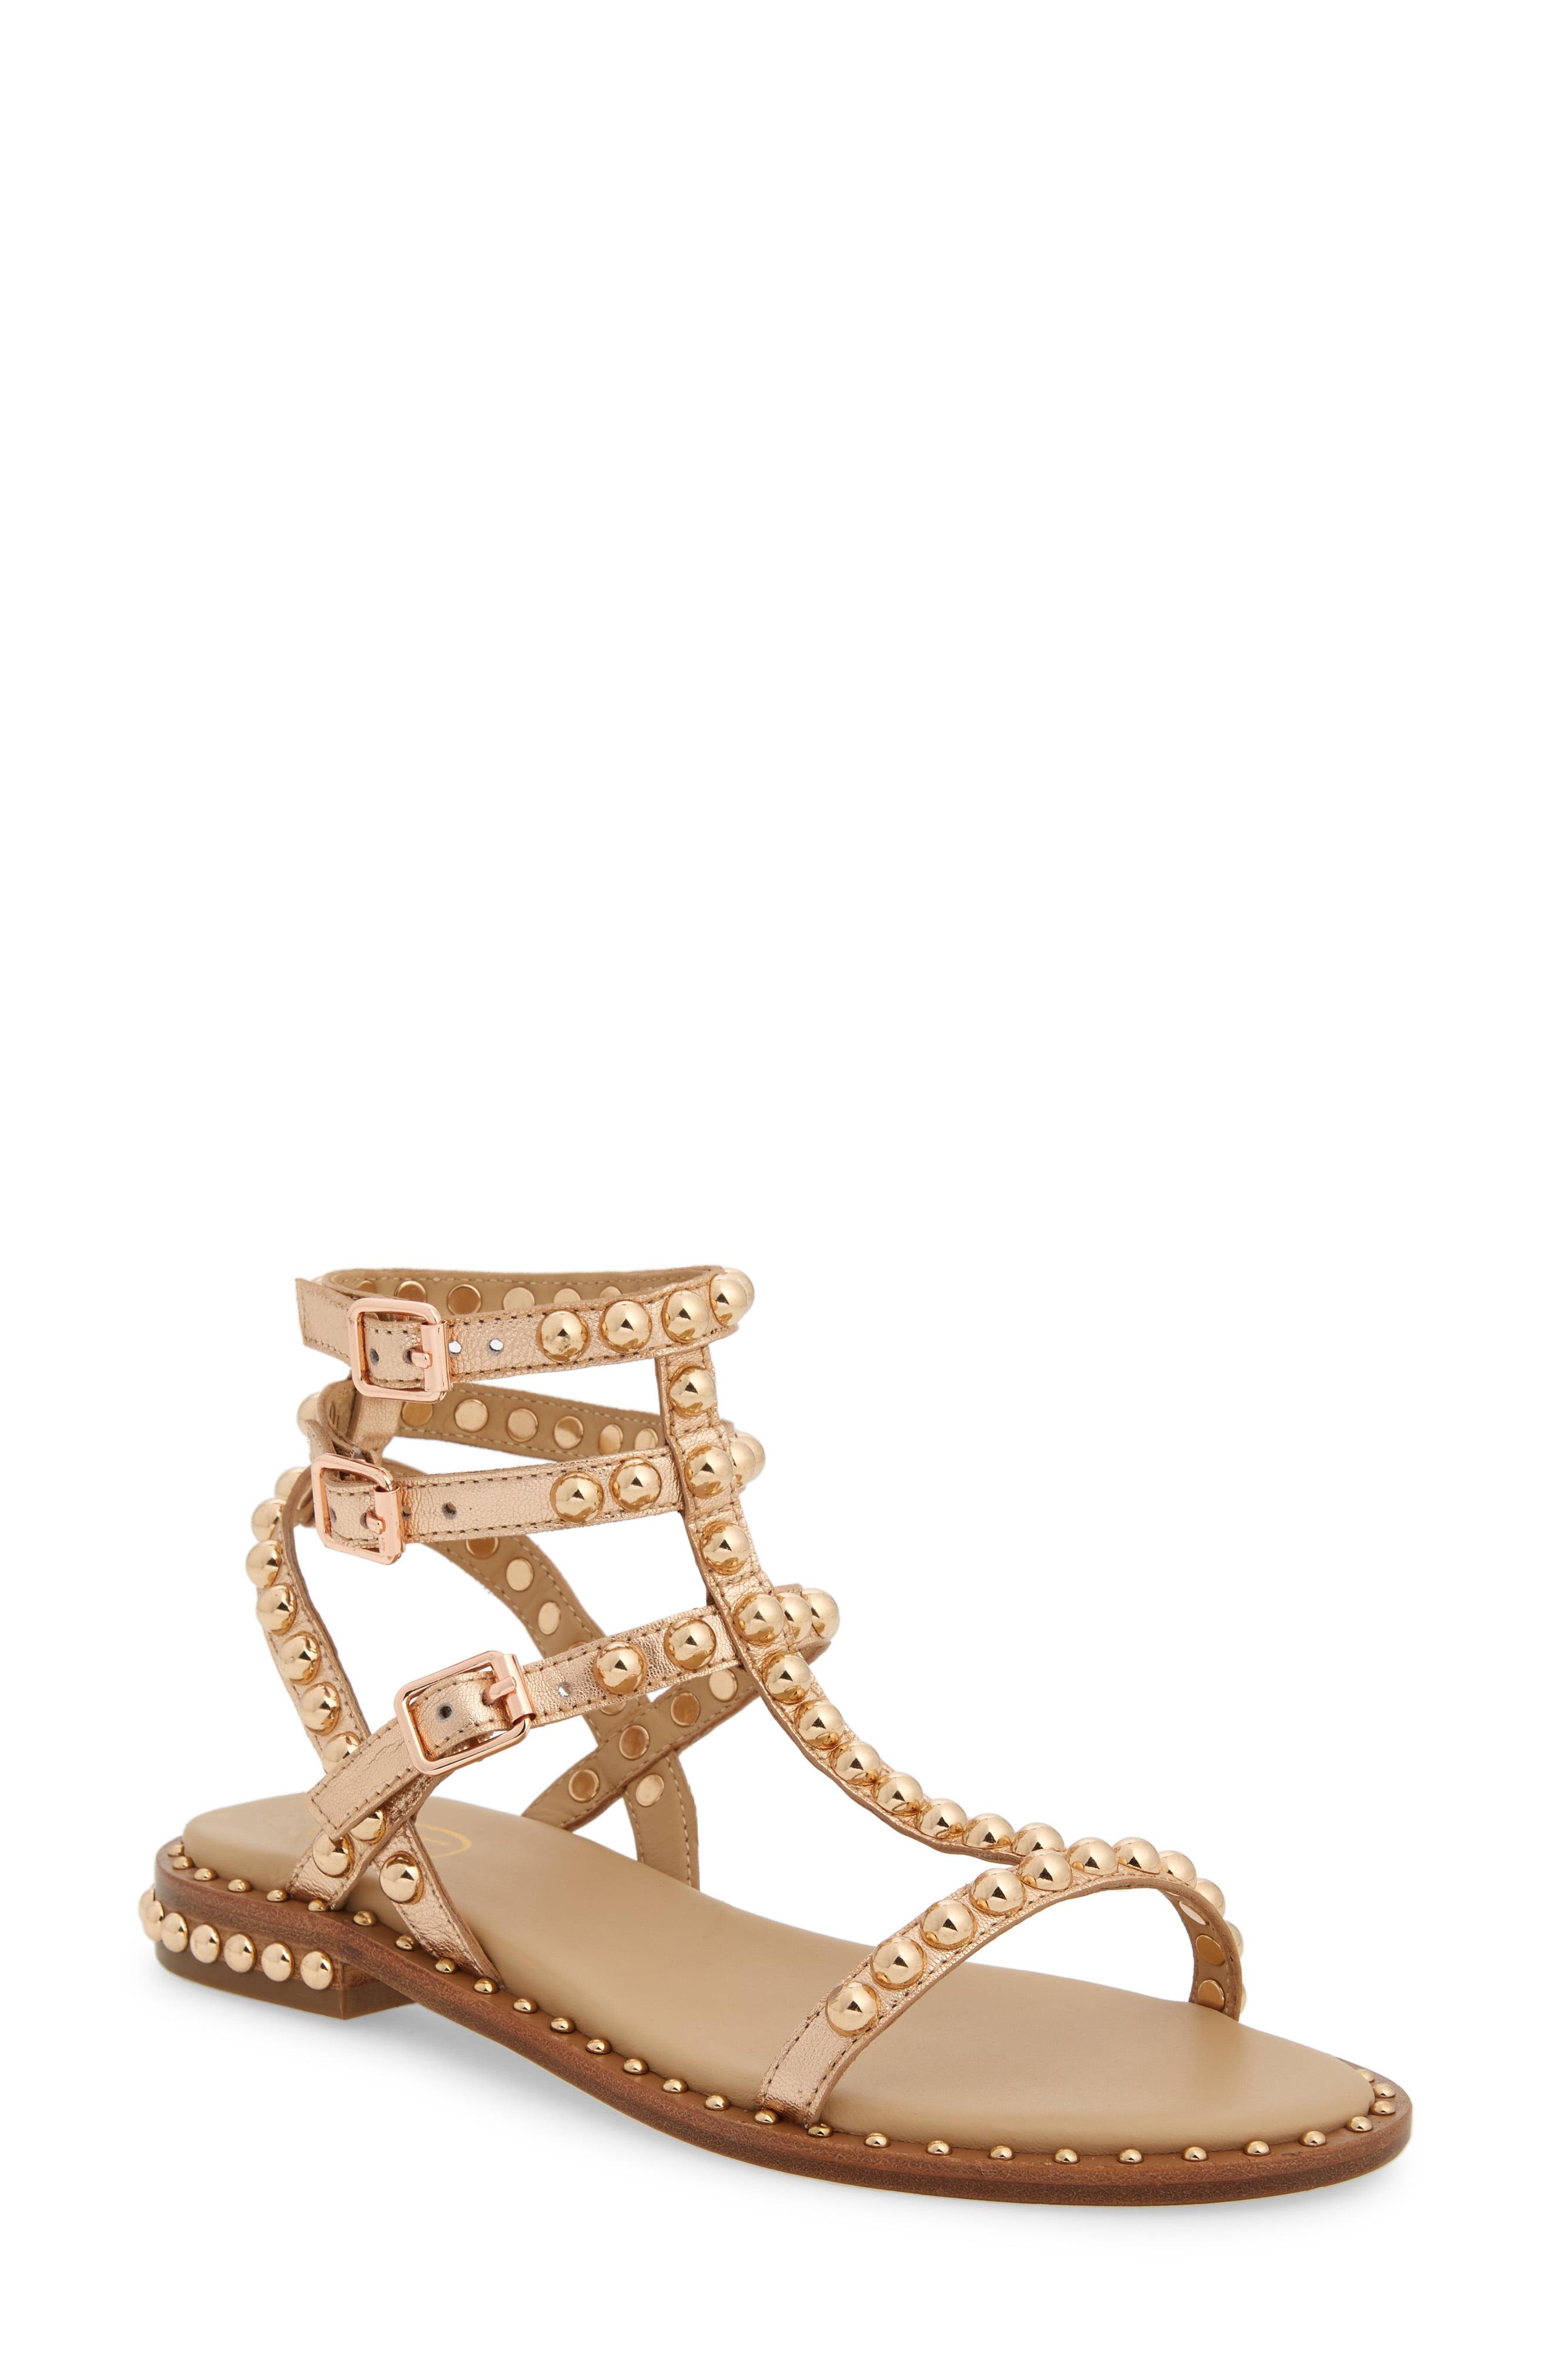 Lyst - Ash Play Studded Sandals - Save 19%